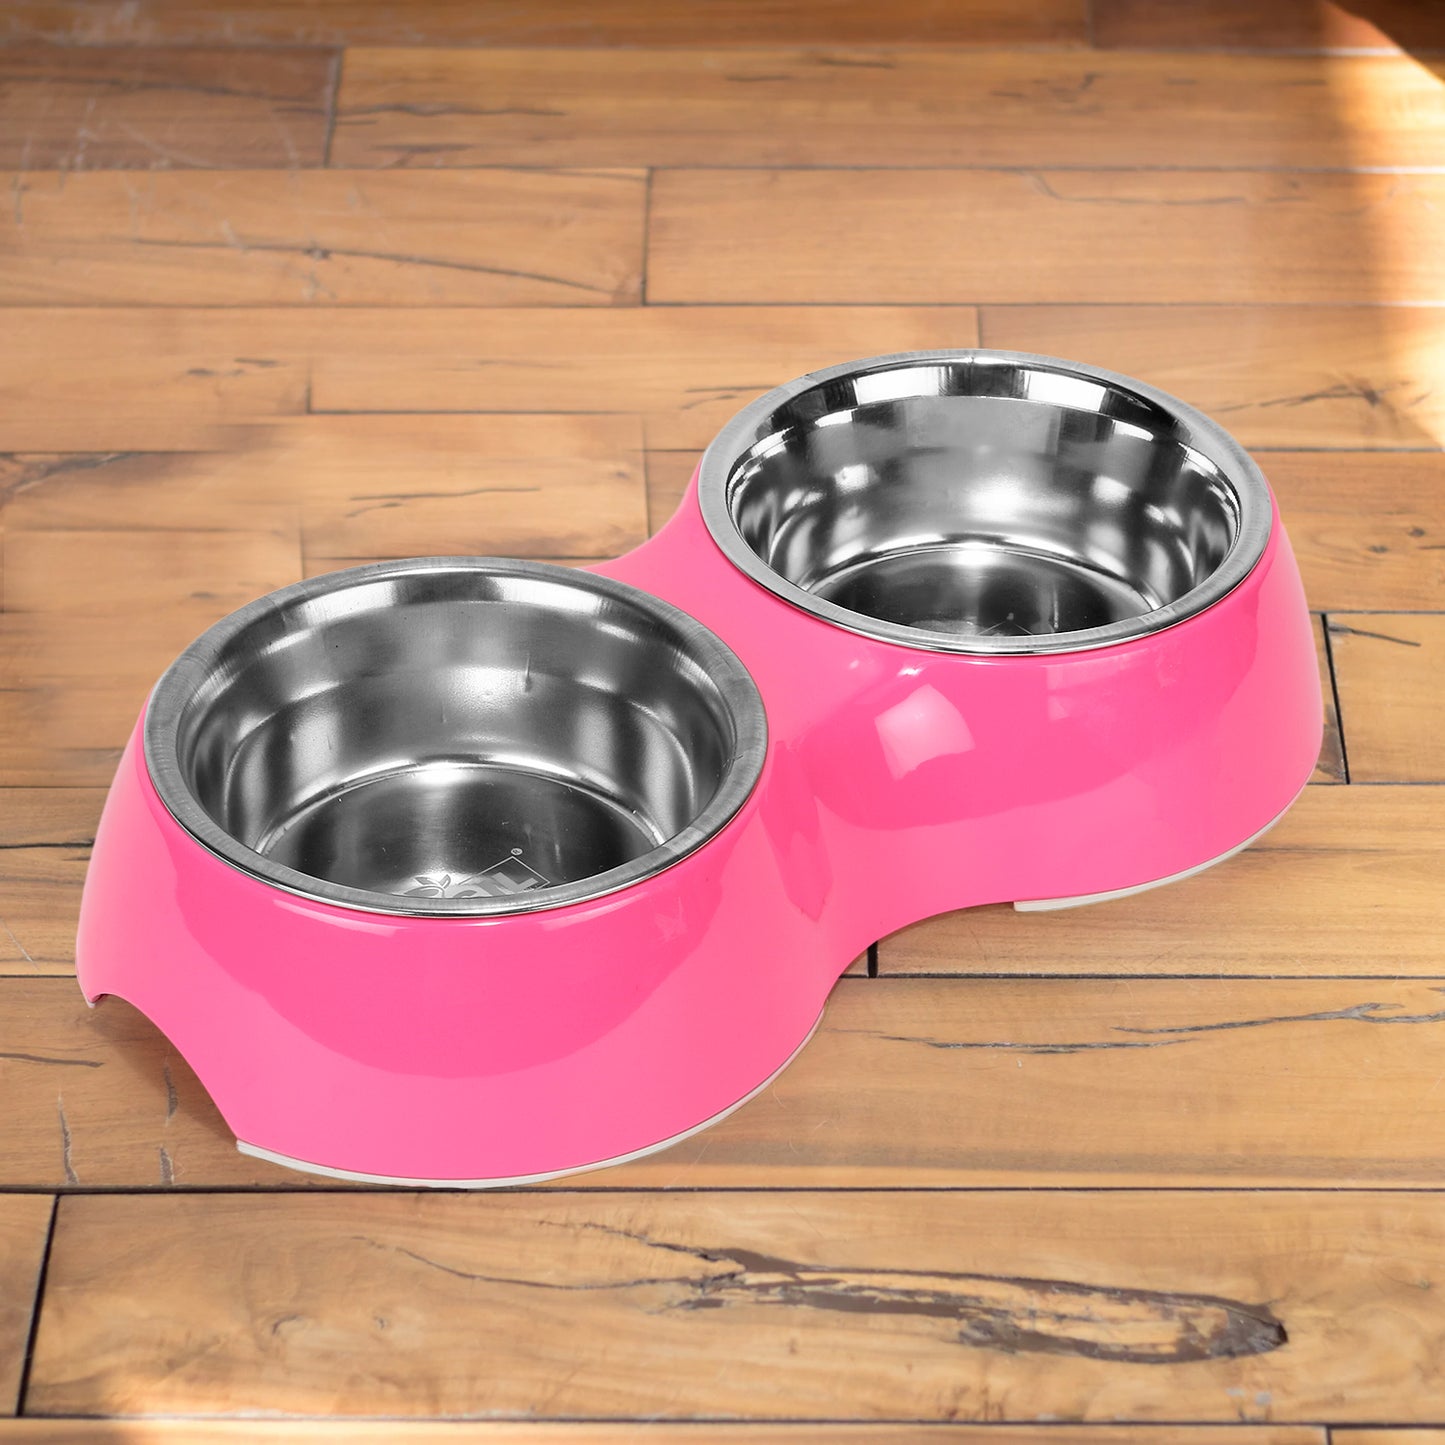 BASIL Melamine Double Dinner Set Pet Feeding Bowls for food and water (Pink)